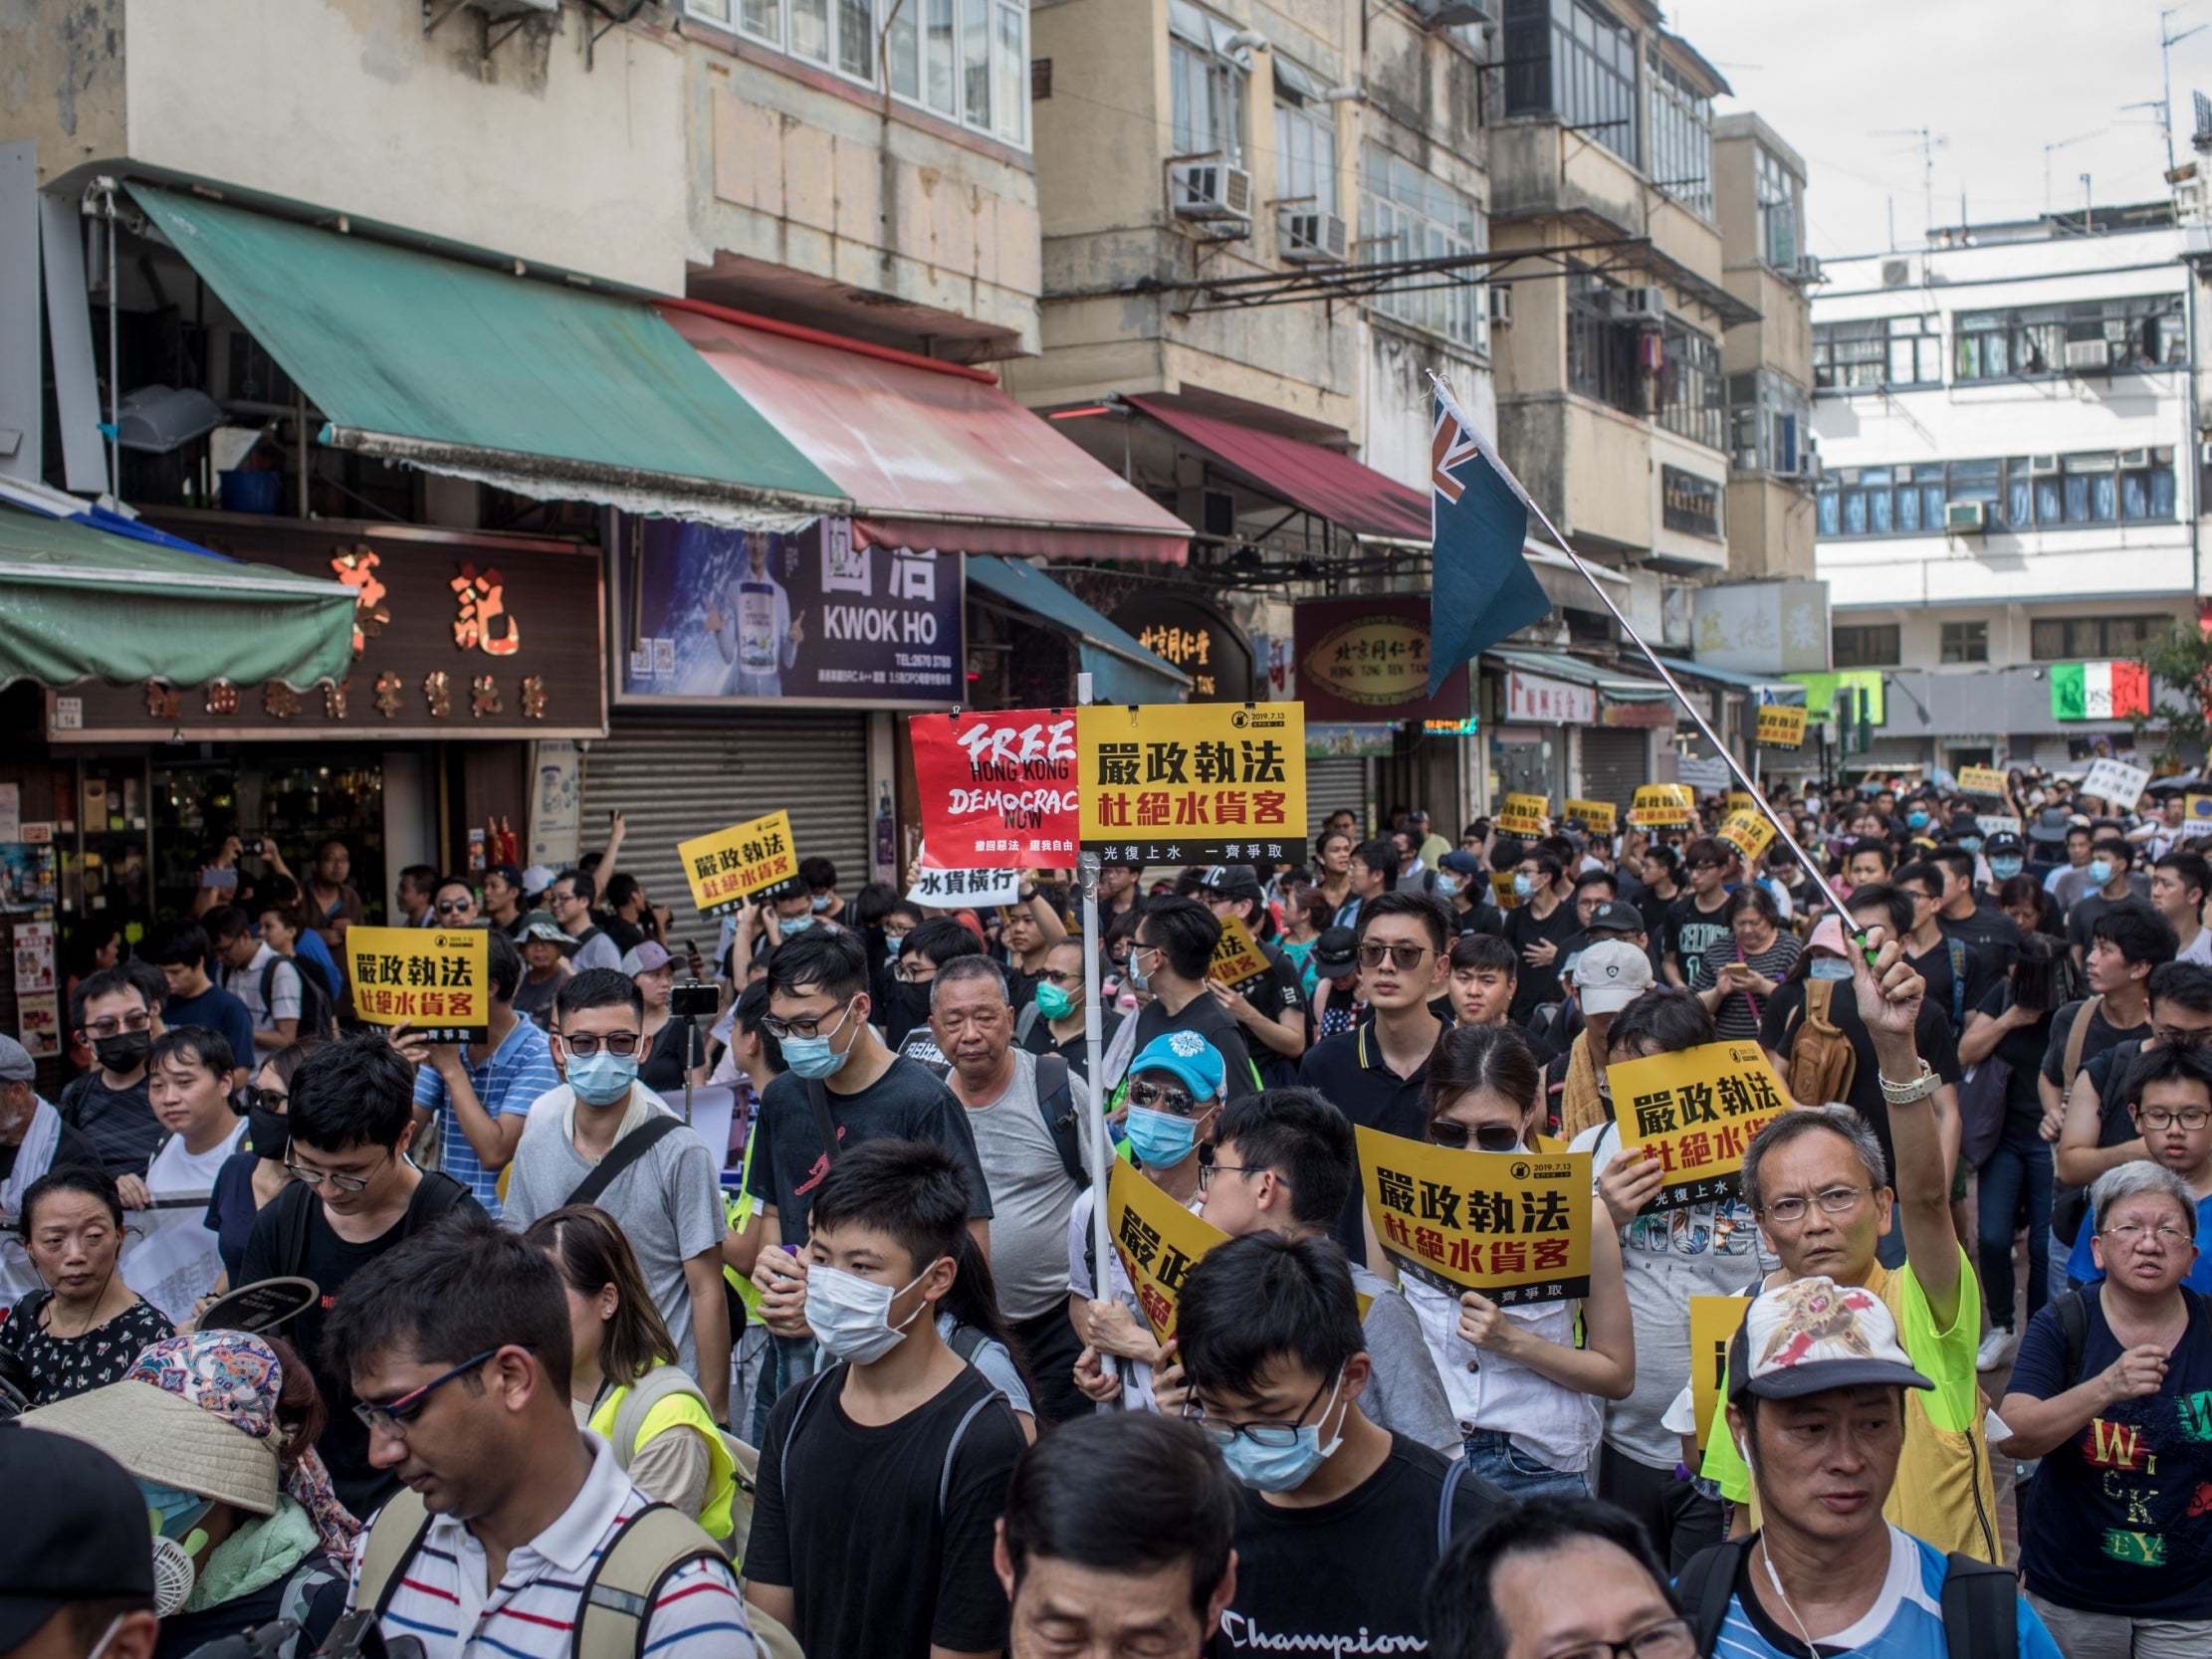 Hong Kong protesters clash with police during anti-Chinese trader march in border town